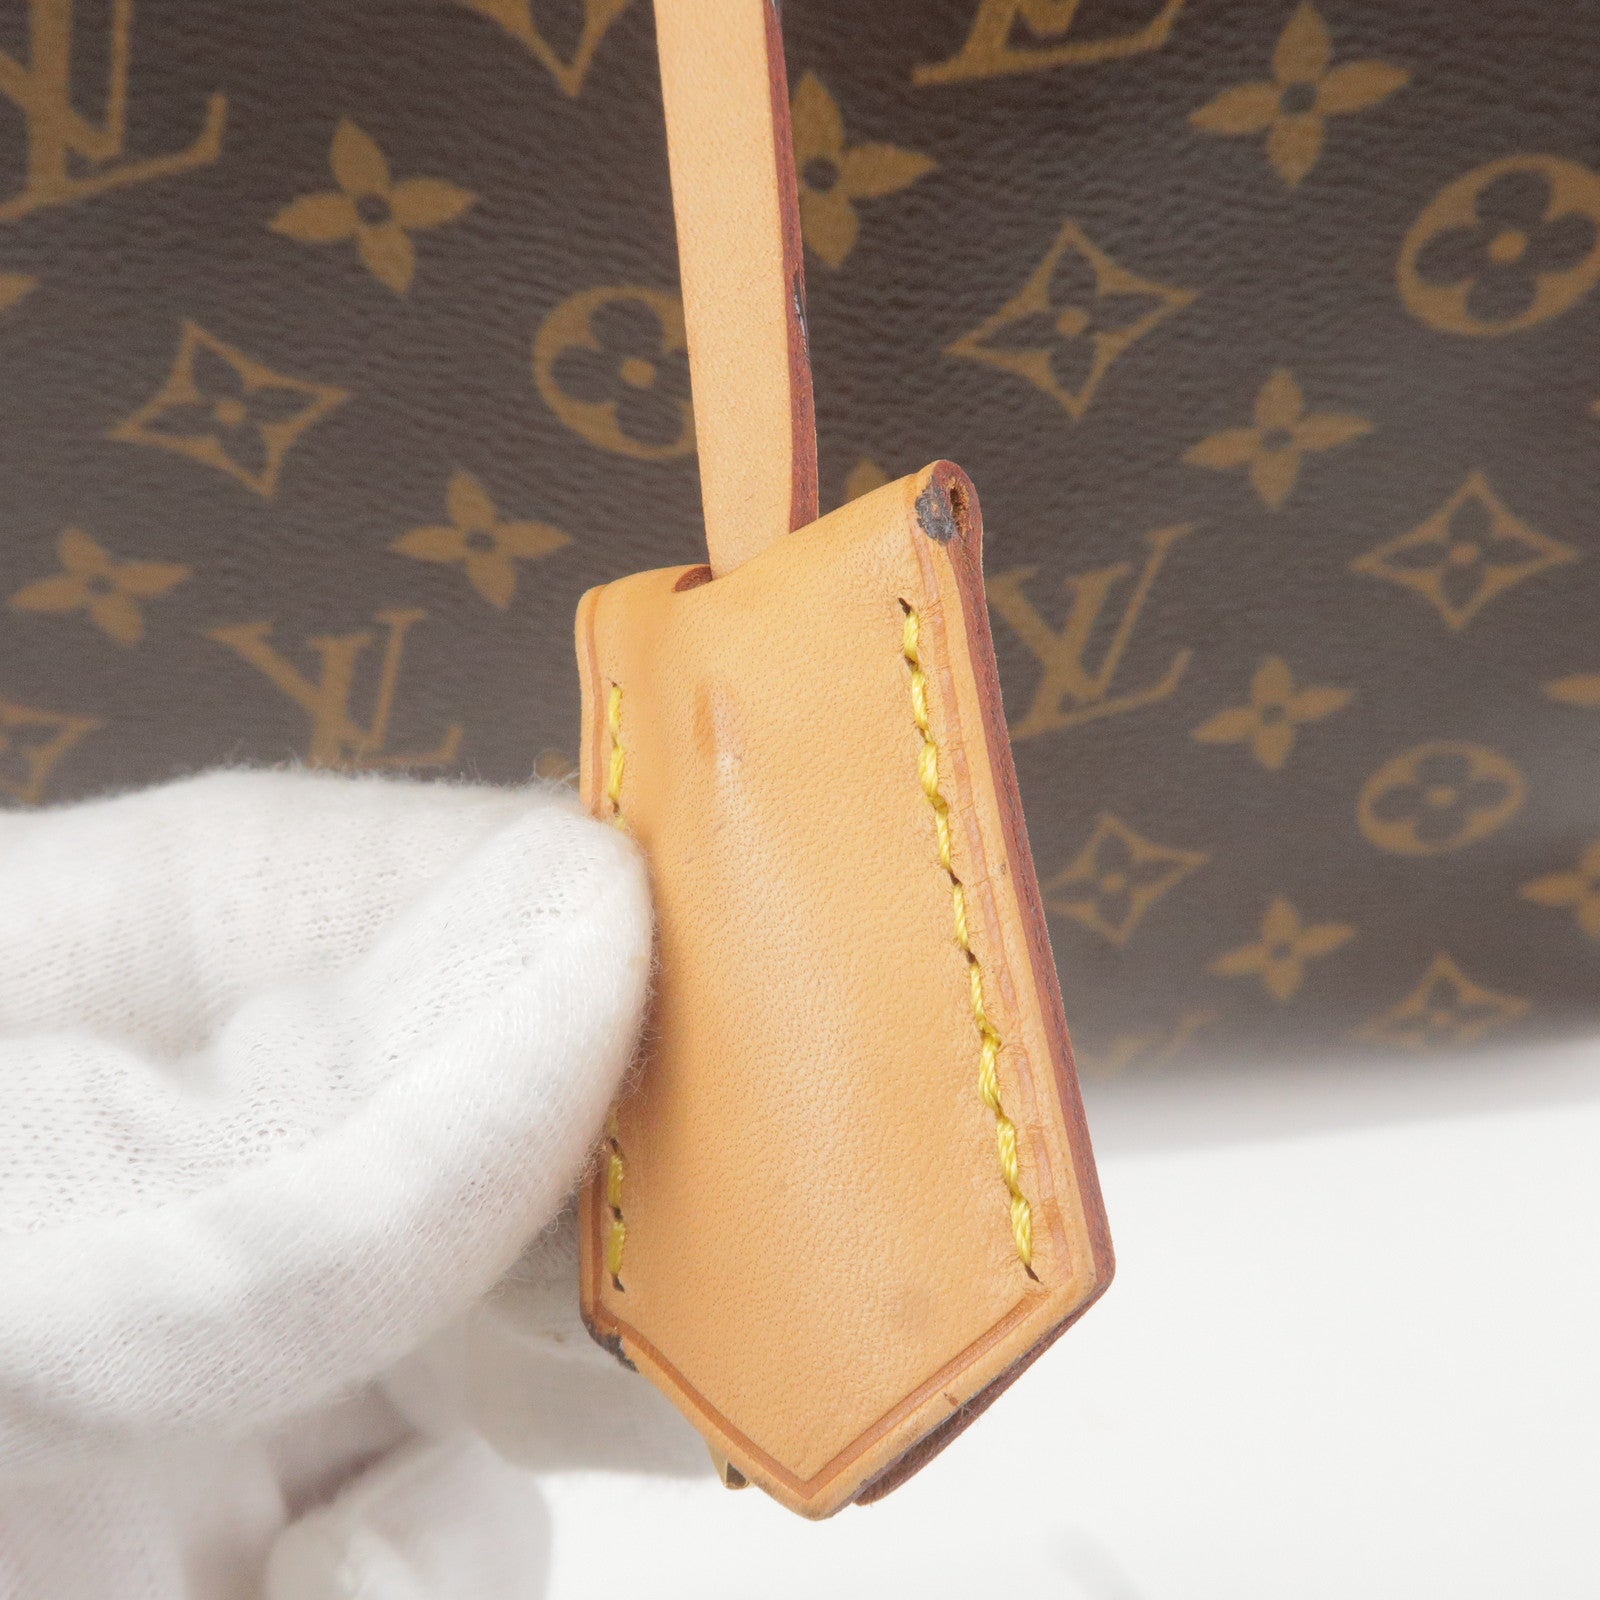 HOW TO: Easy Way to Attach LOUIS VUITTON CLOCHETTE Key Bell